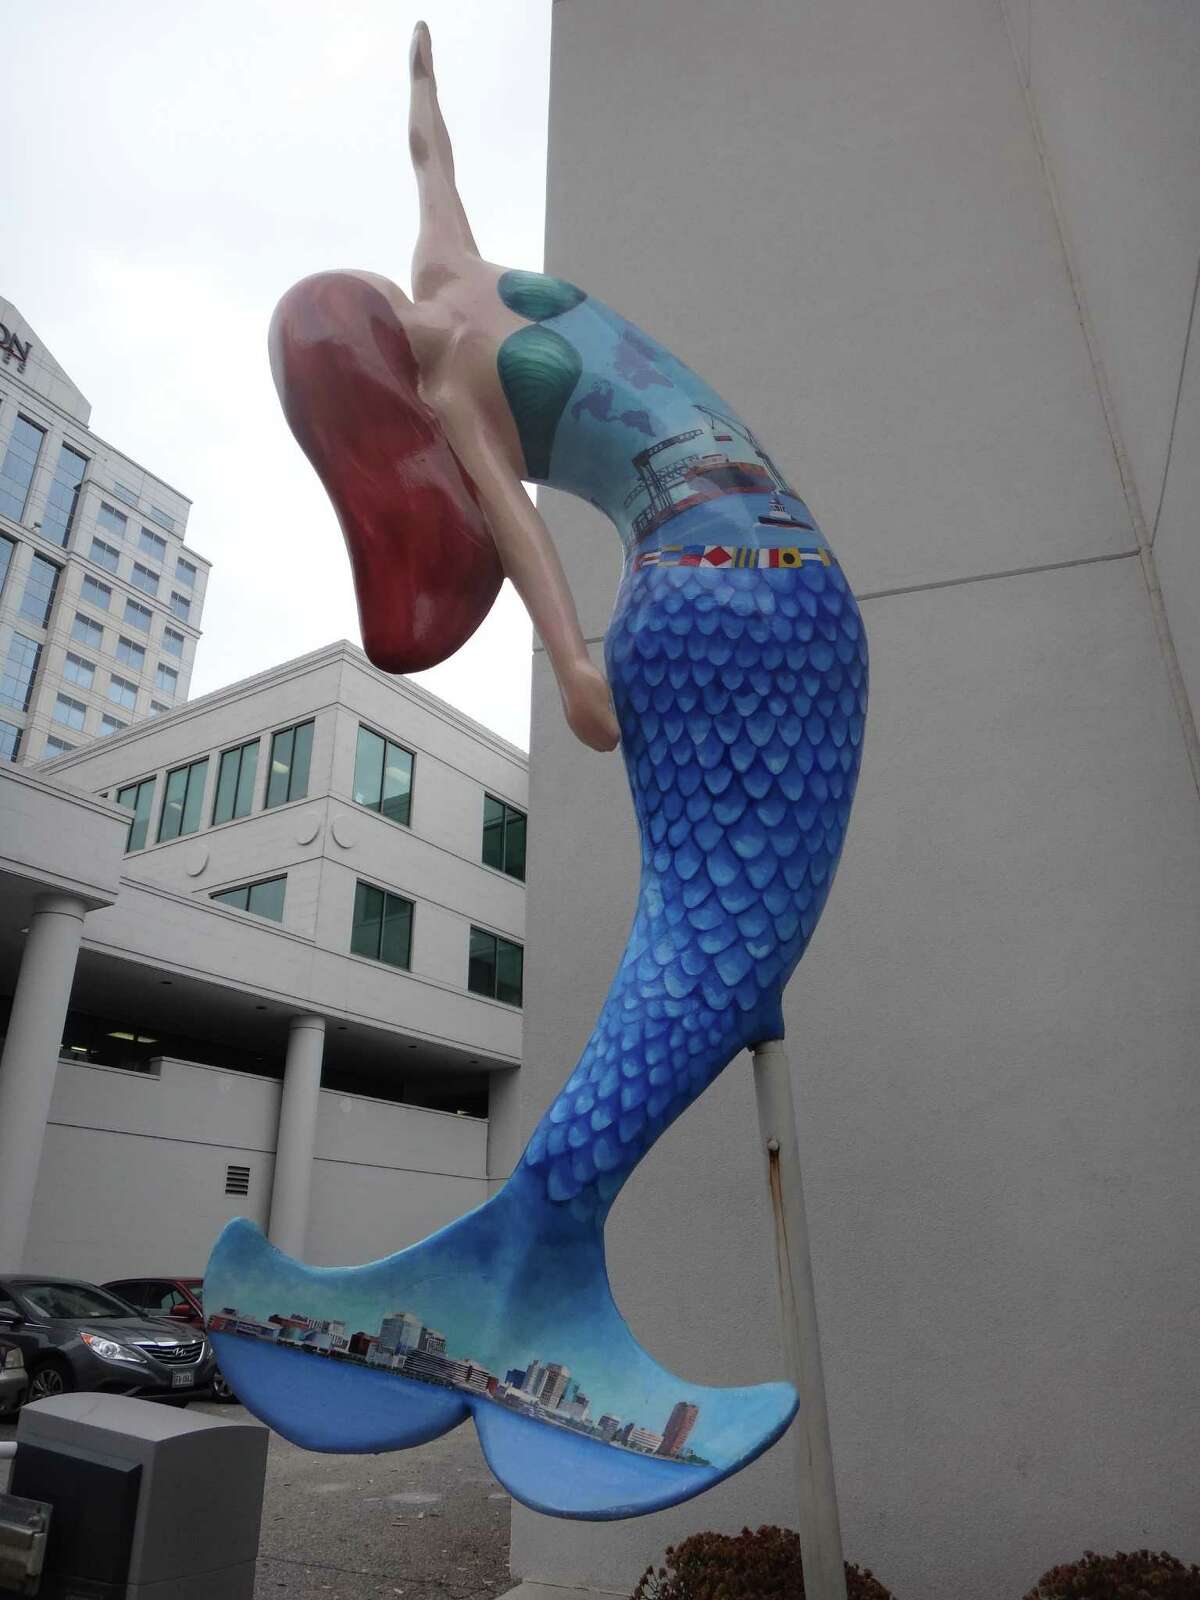 One of many “Mermaids on Parade” sculptures greets passersby around downtown Norfolk.